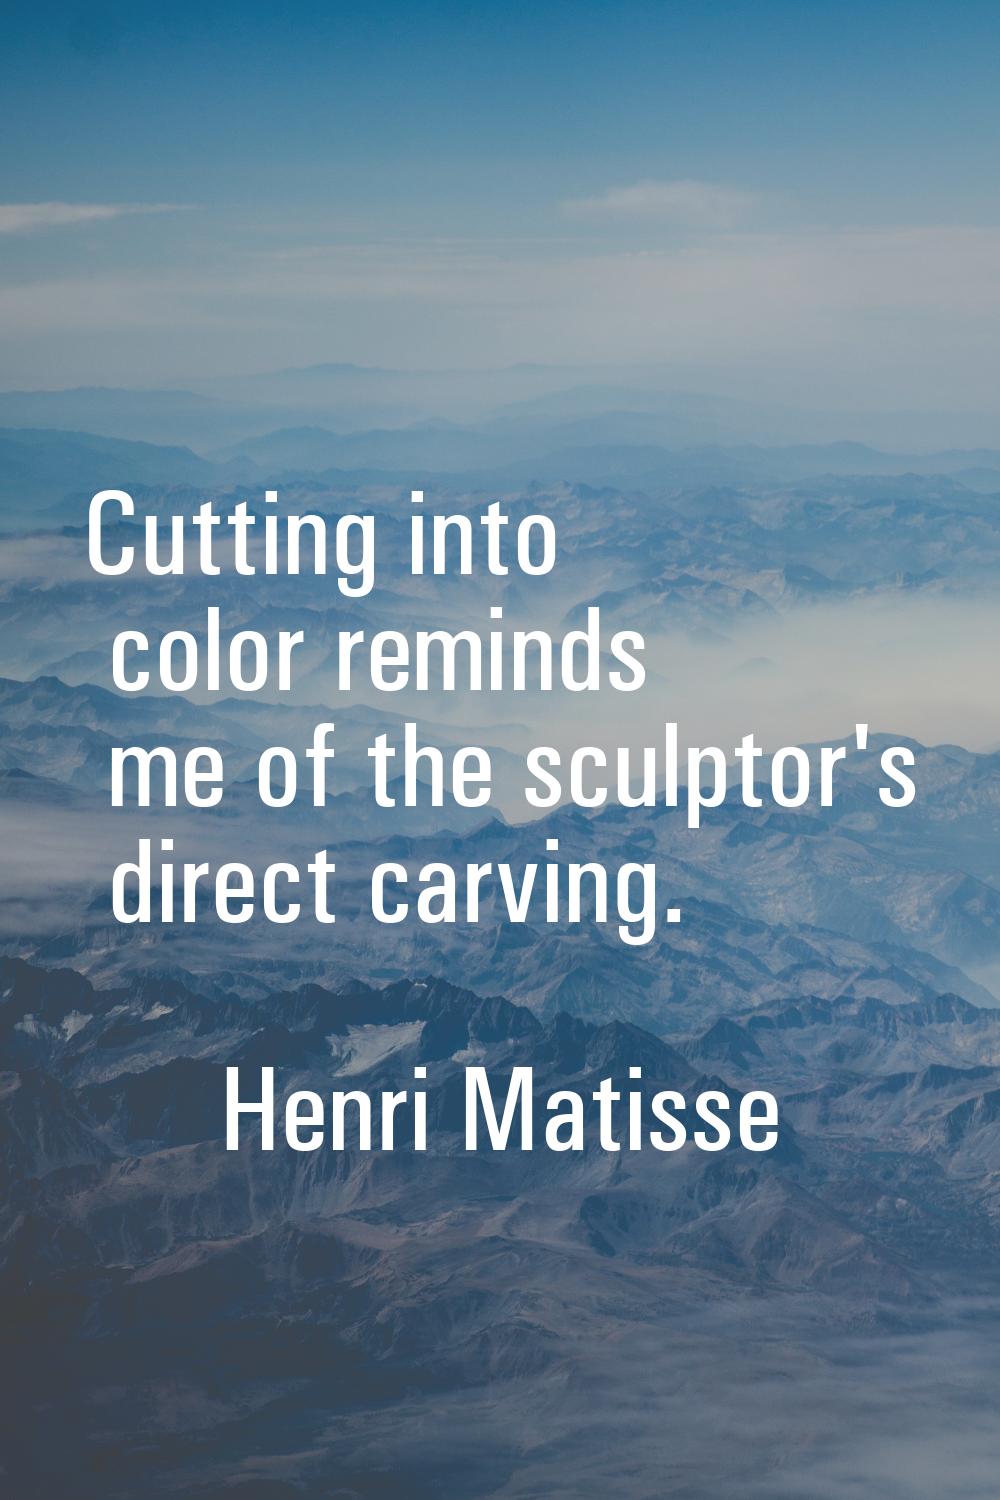 Cutting into color reminds me of the sculptor's direct carving.